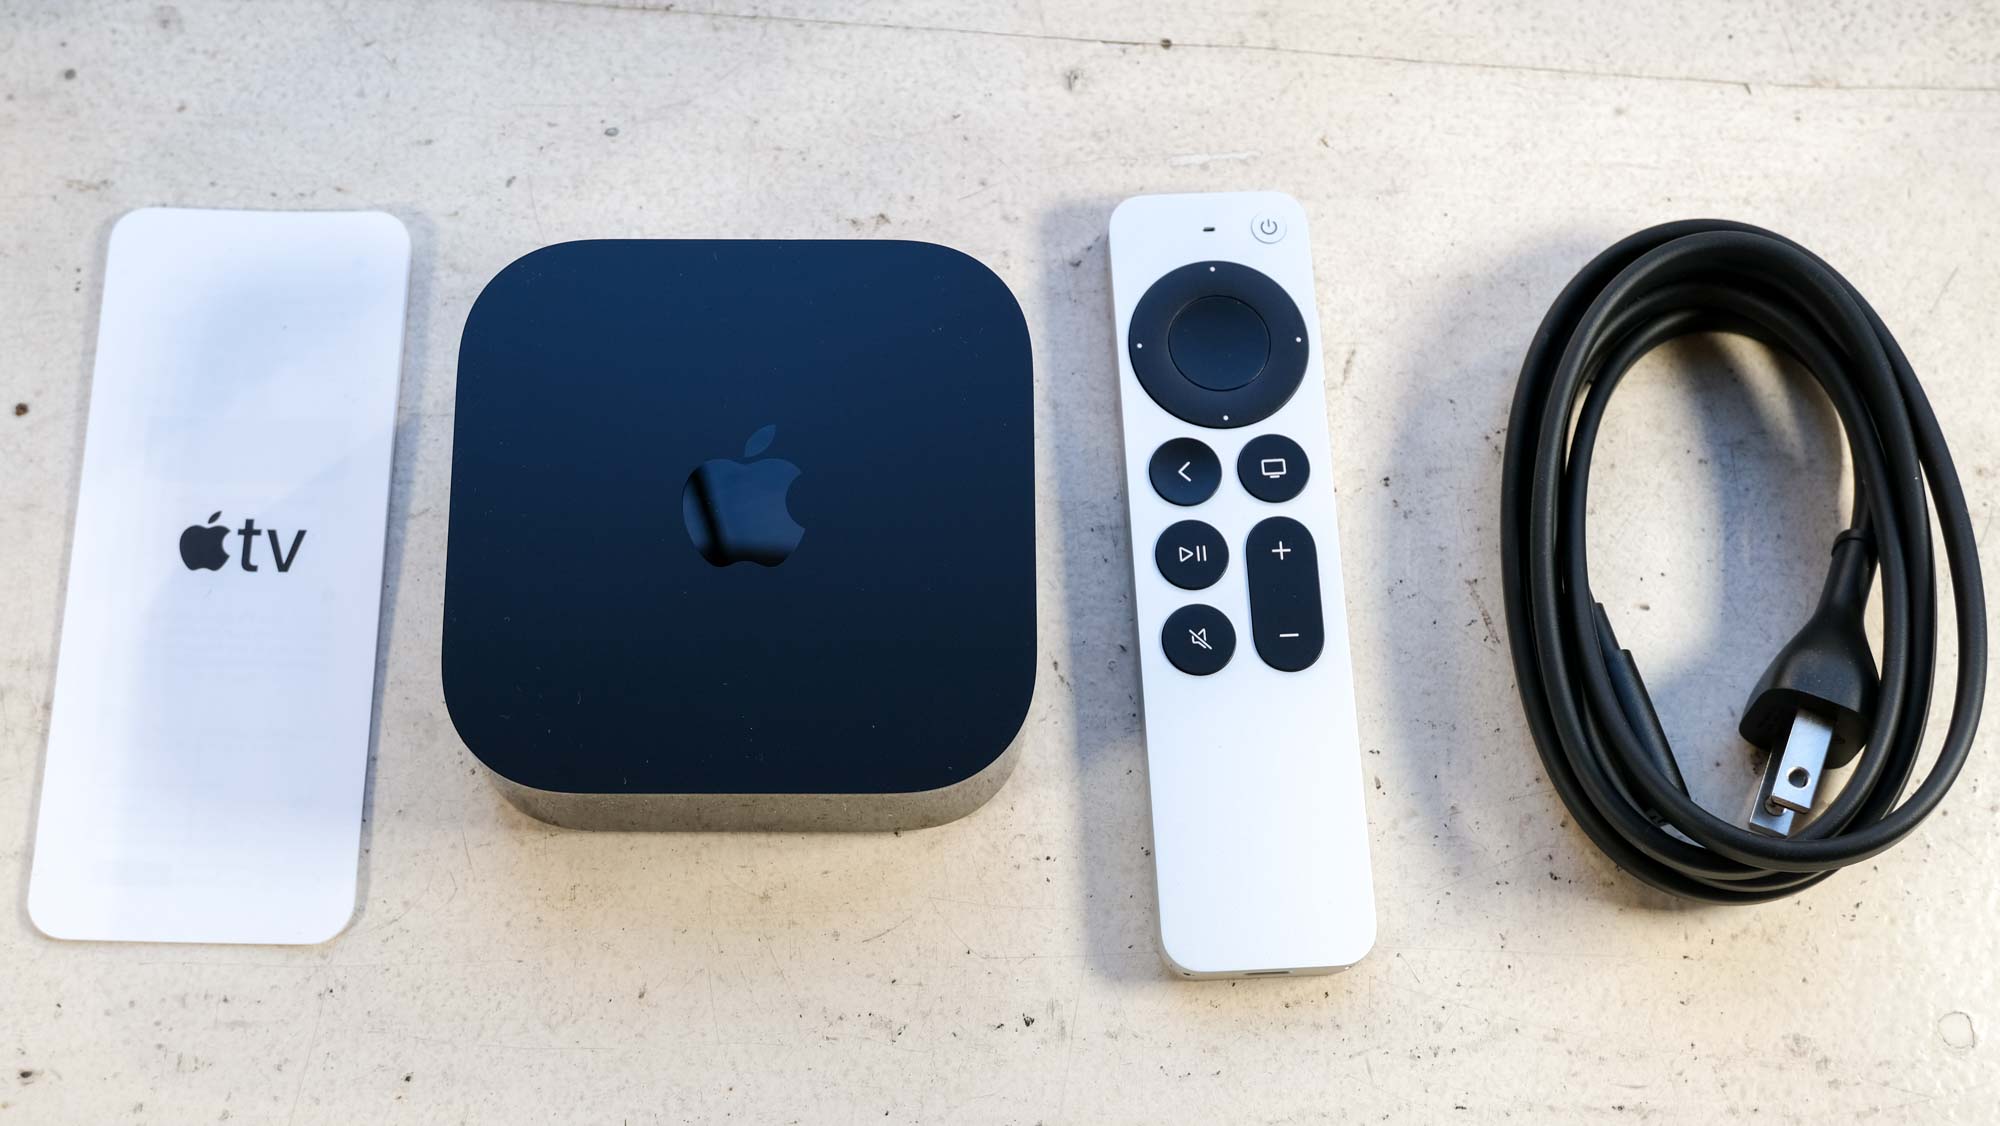 The Apple TV 4K (2022) box's contents: a pamphlet, the Apple TV 4K (2022), the Siri remote and power cable.